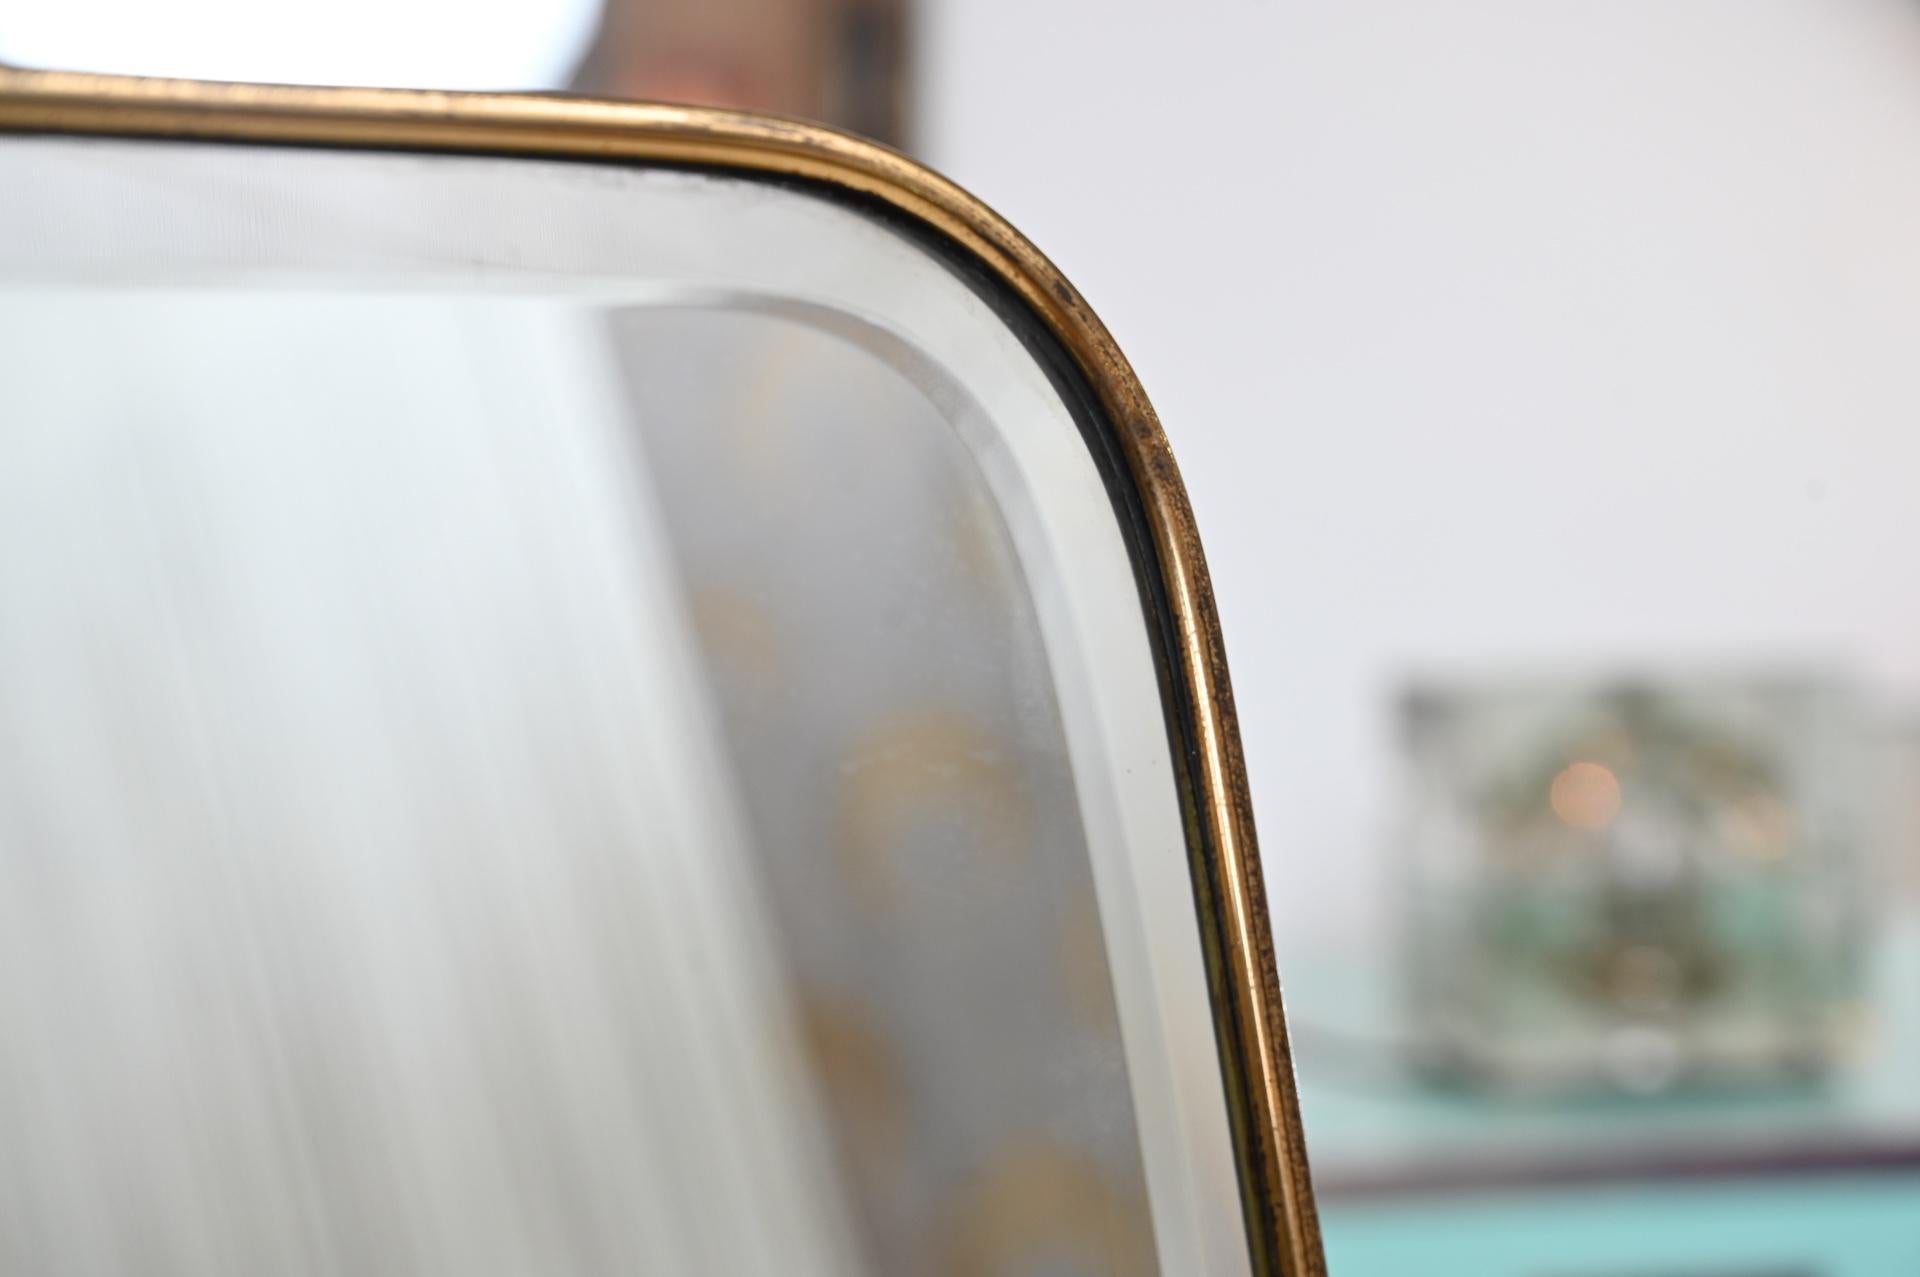 Lovely waisted mirror with brass frame.

Good quality and bevelled, which is unusual for this style of mirror.